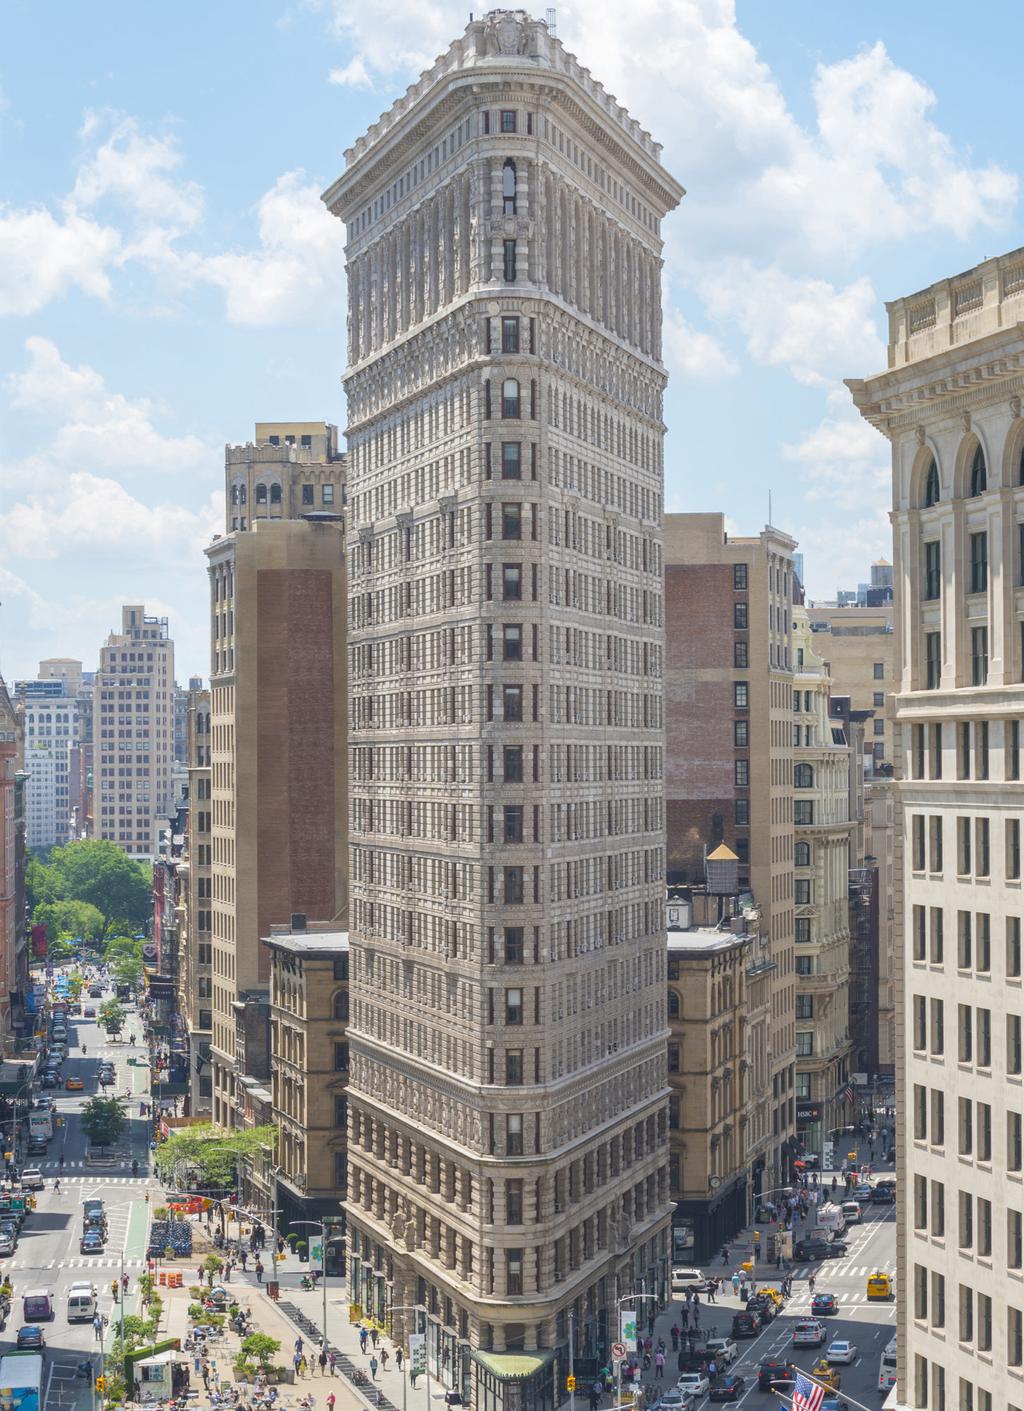 175 FIFTH AVENUE The triangular 22-story landmark located at 175 Fifth Avenue, the Flatiron Building was considered to be a pioneering skyscraper of its era.